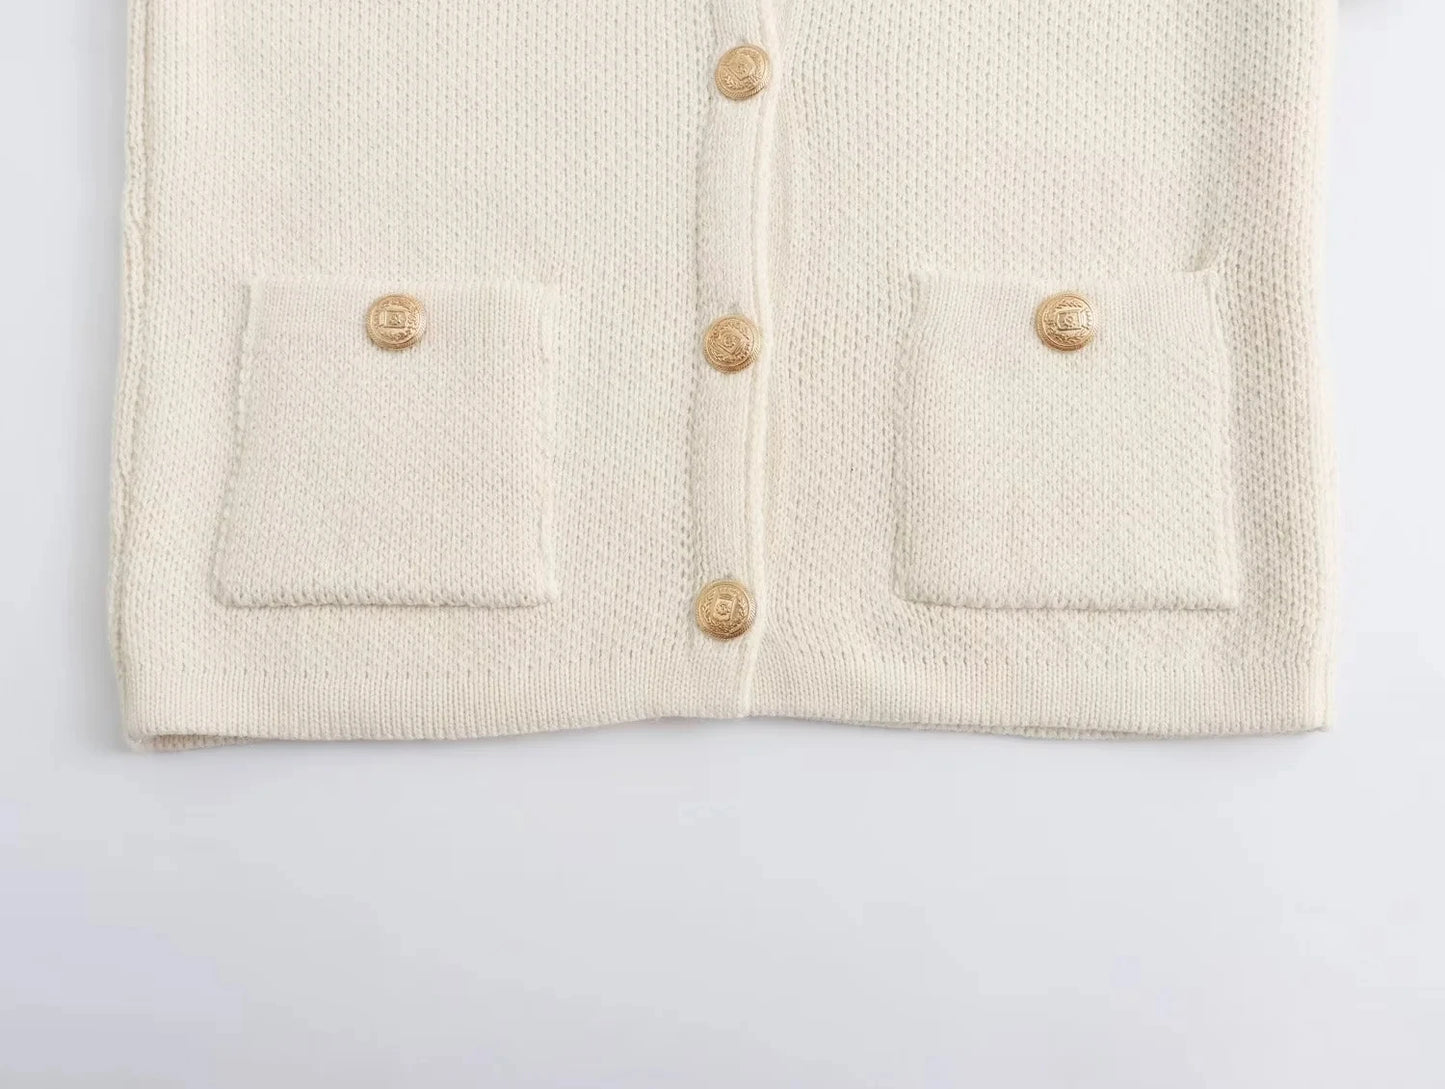 Knit Cardigan With Golden Buttons Black Or Beige